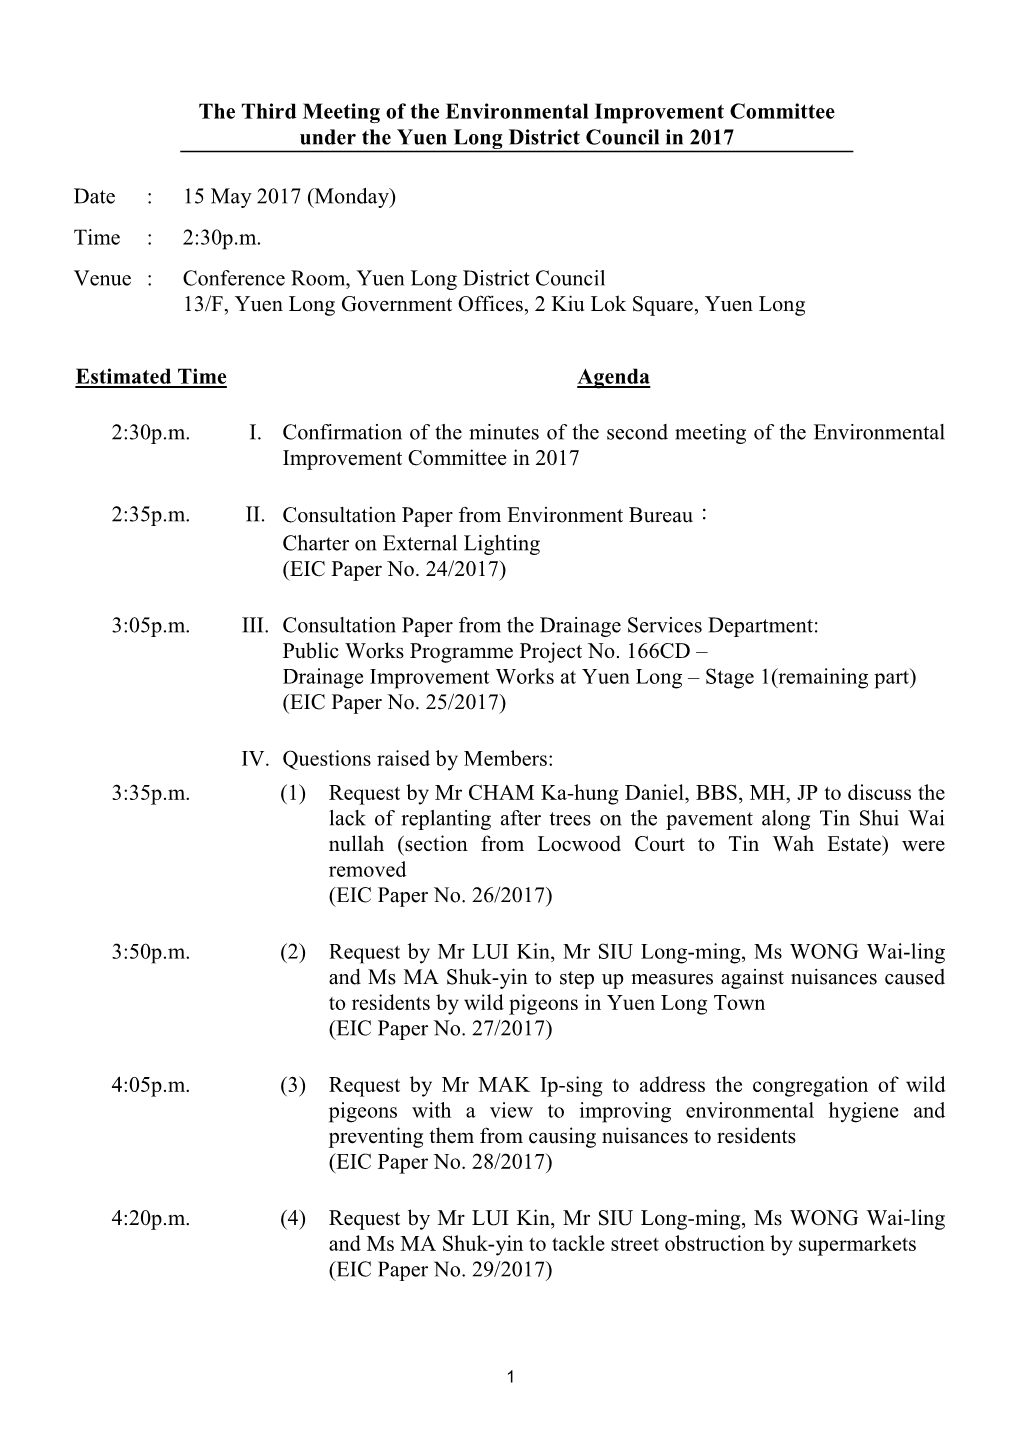 The Third Meeting of the Environmental Improvement Committee Under the Yuen Long District Council in 2017